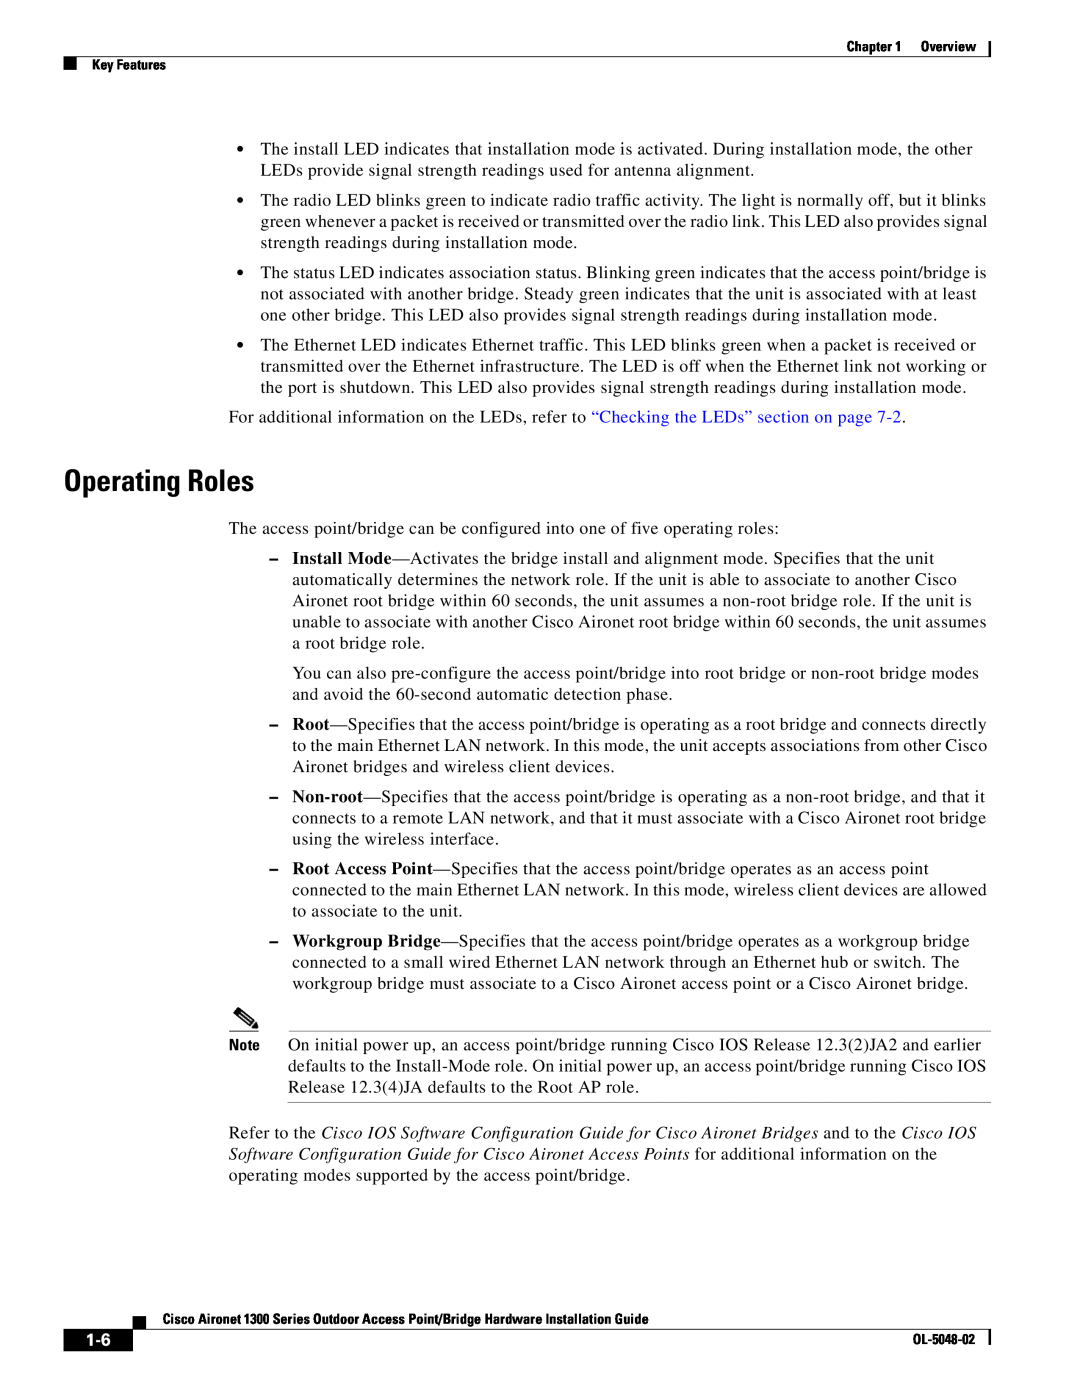 Cisco Systems 1300 Series manual Operating Roles 